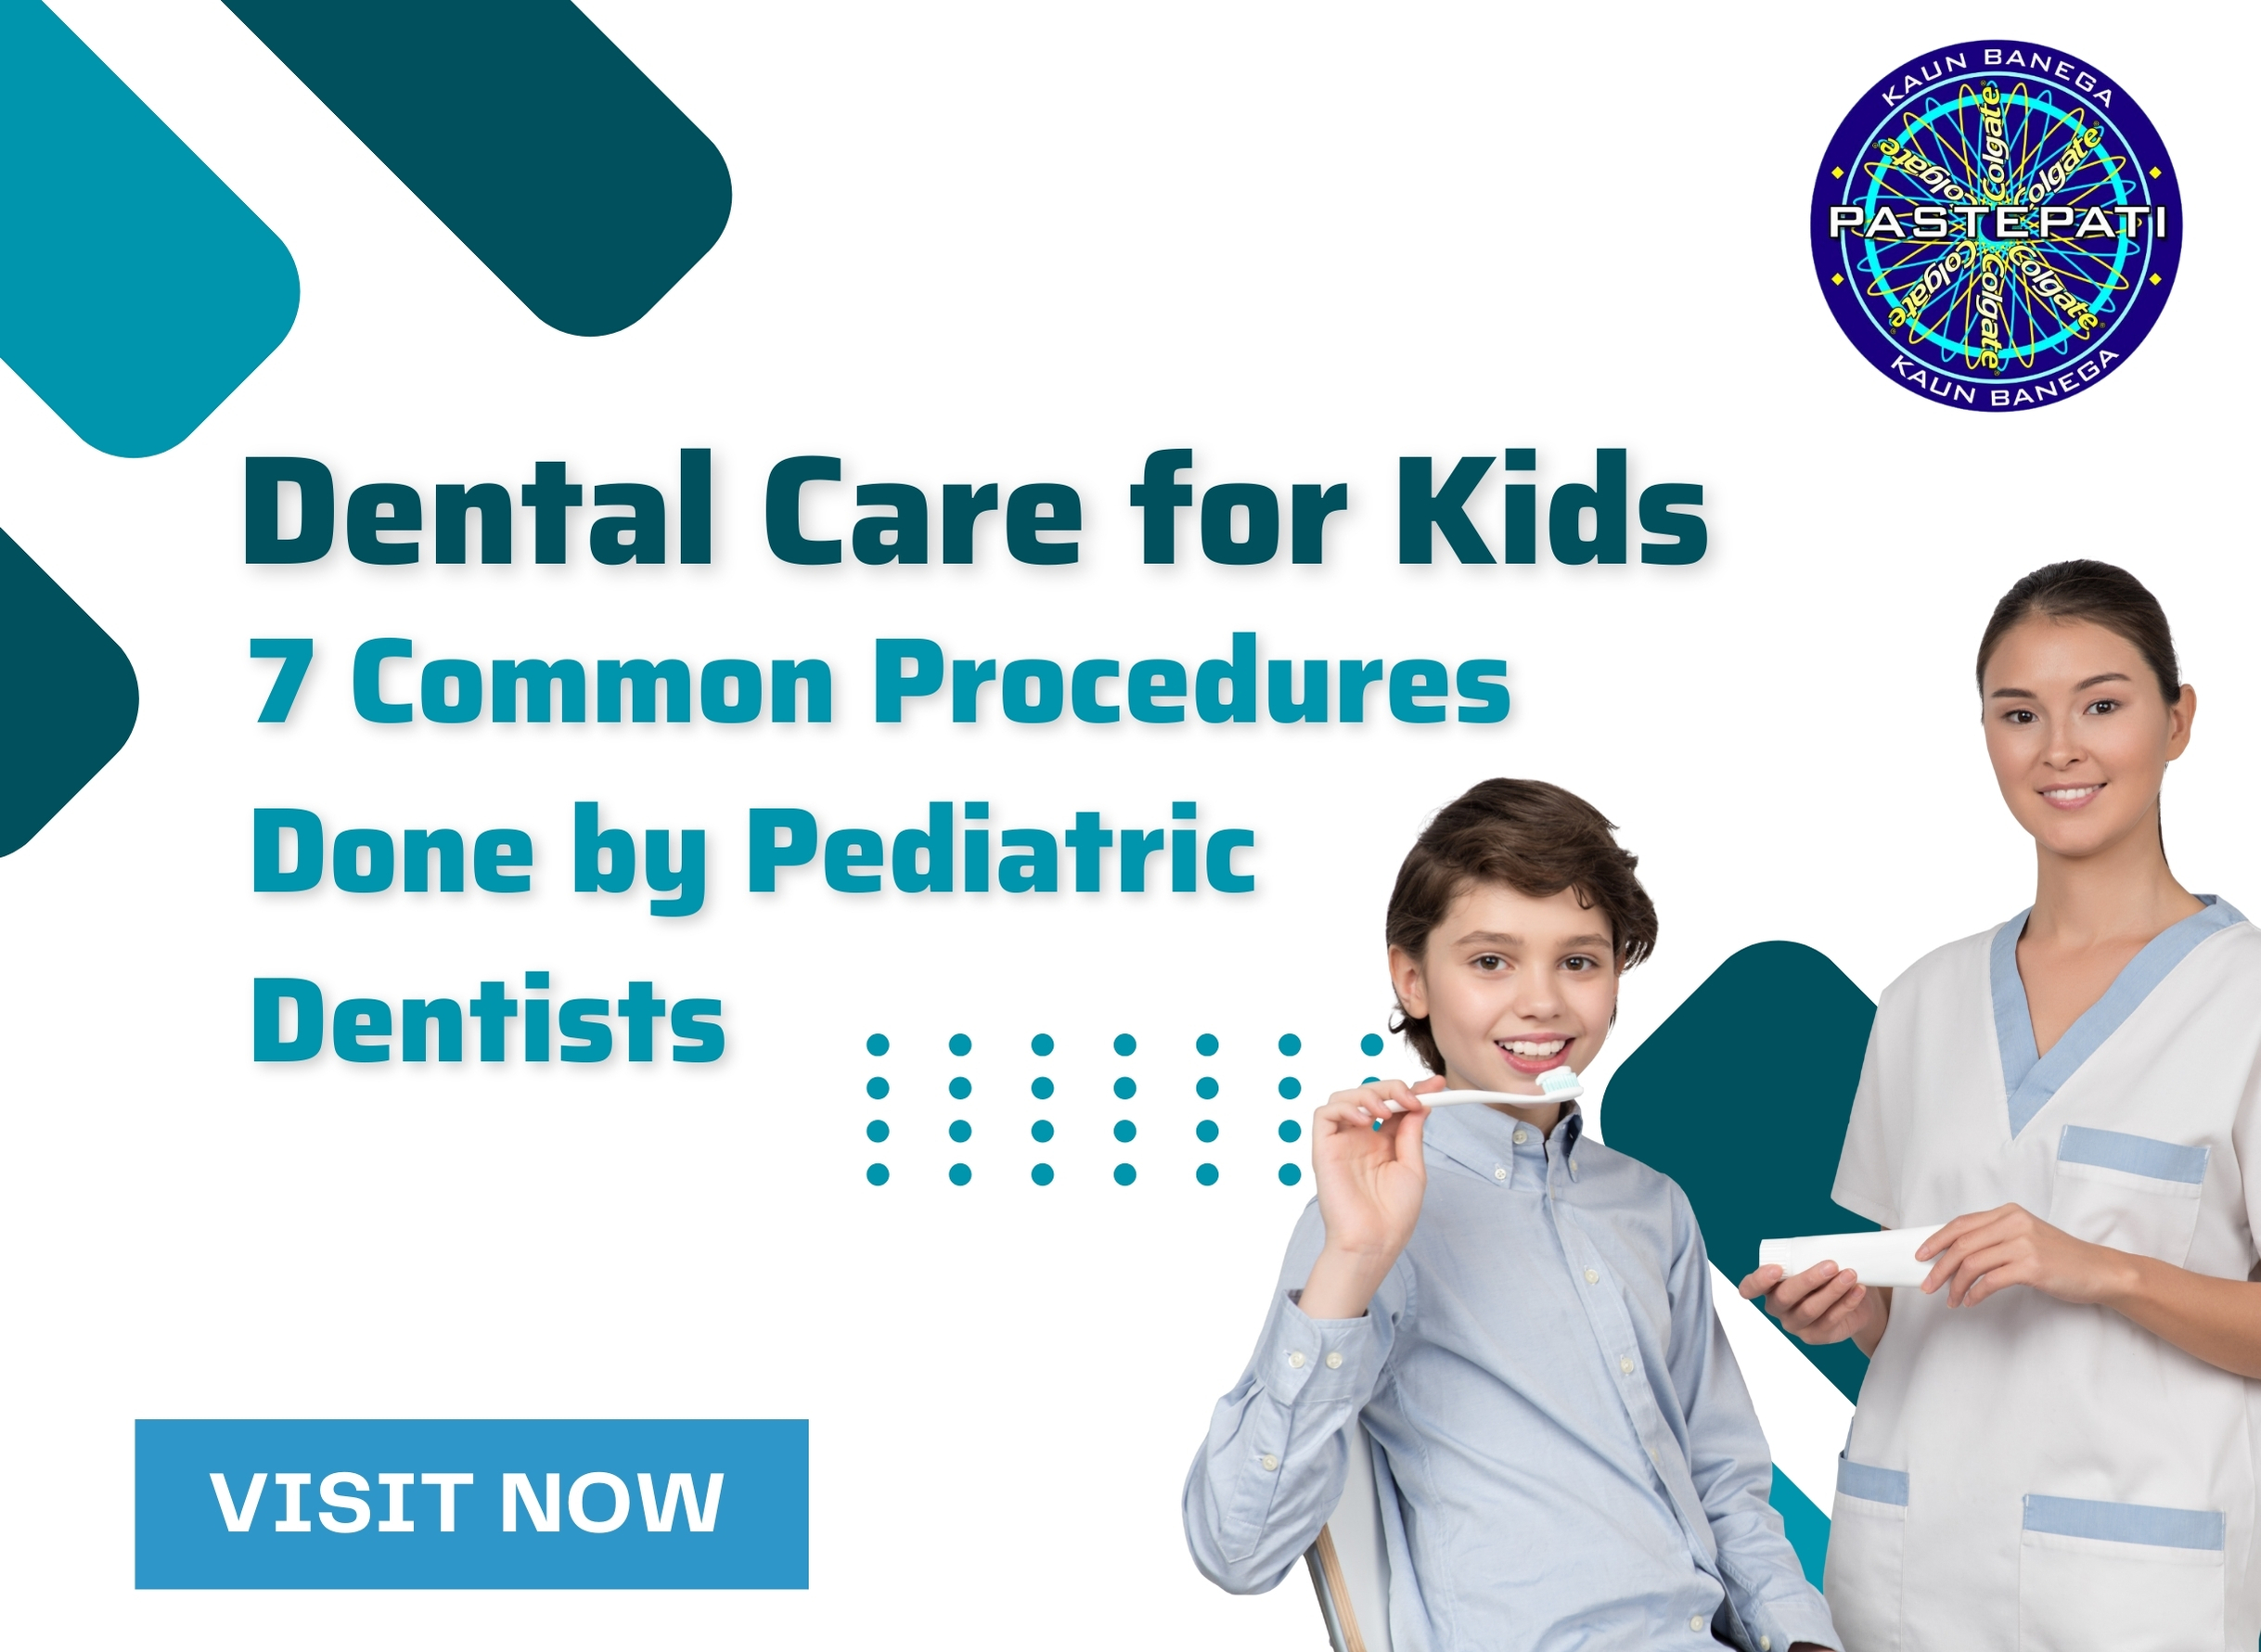 Dental Care for Kids: 7 Common Procedures Done by Pediatric Dentists